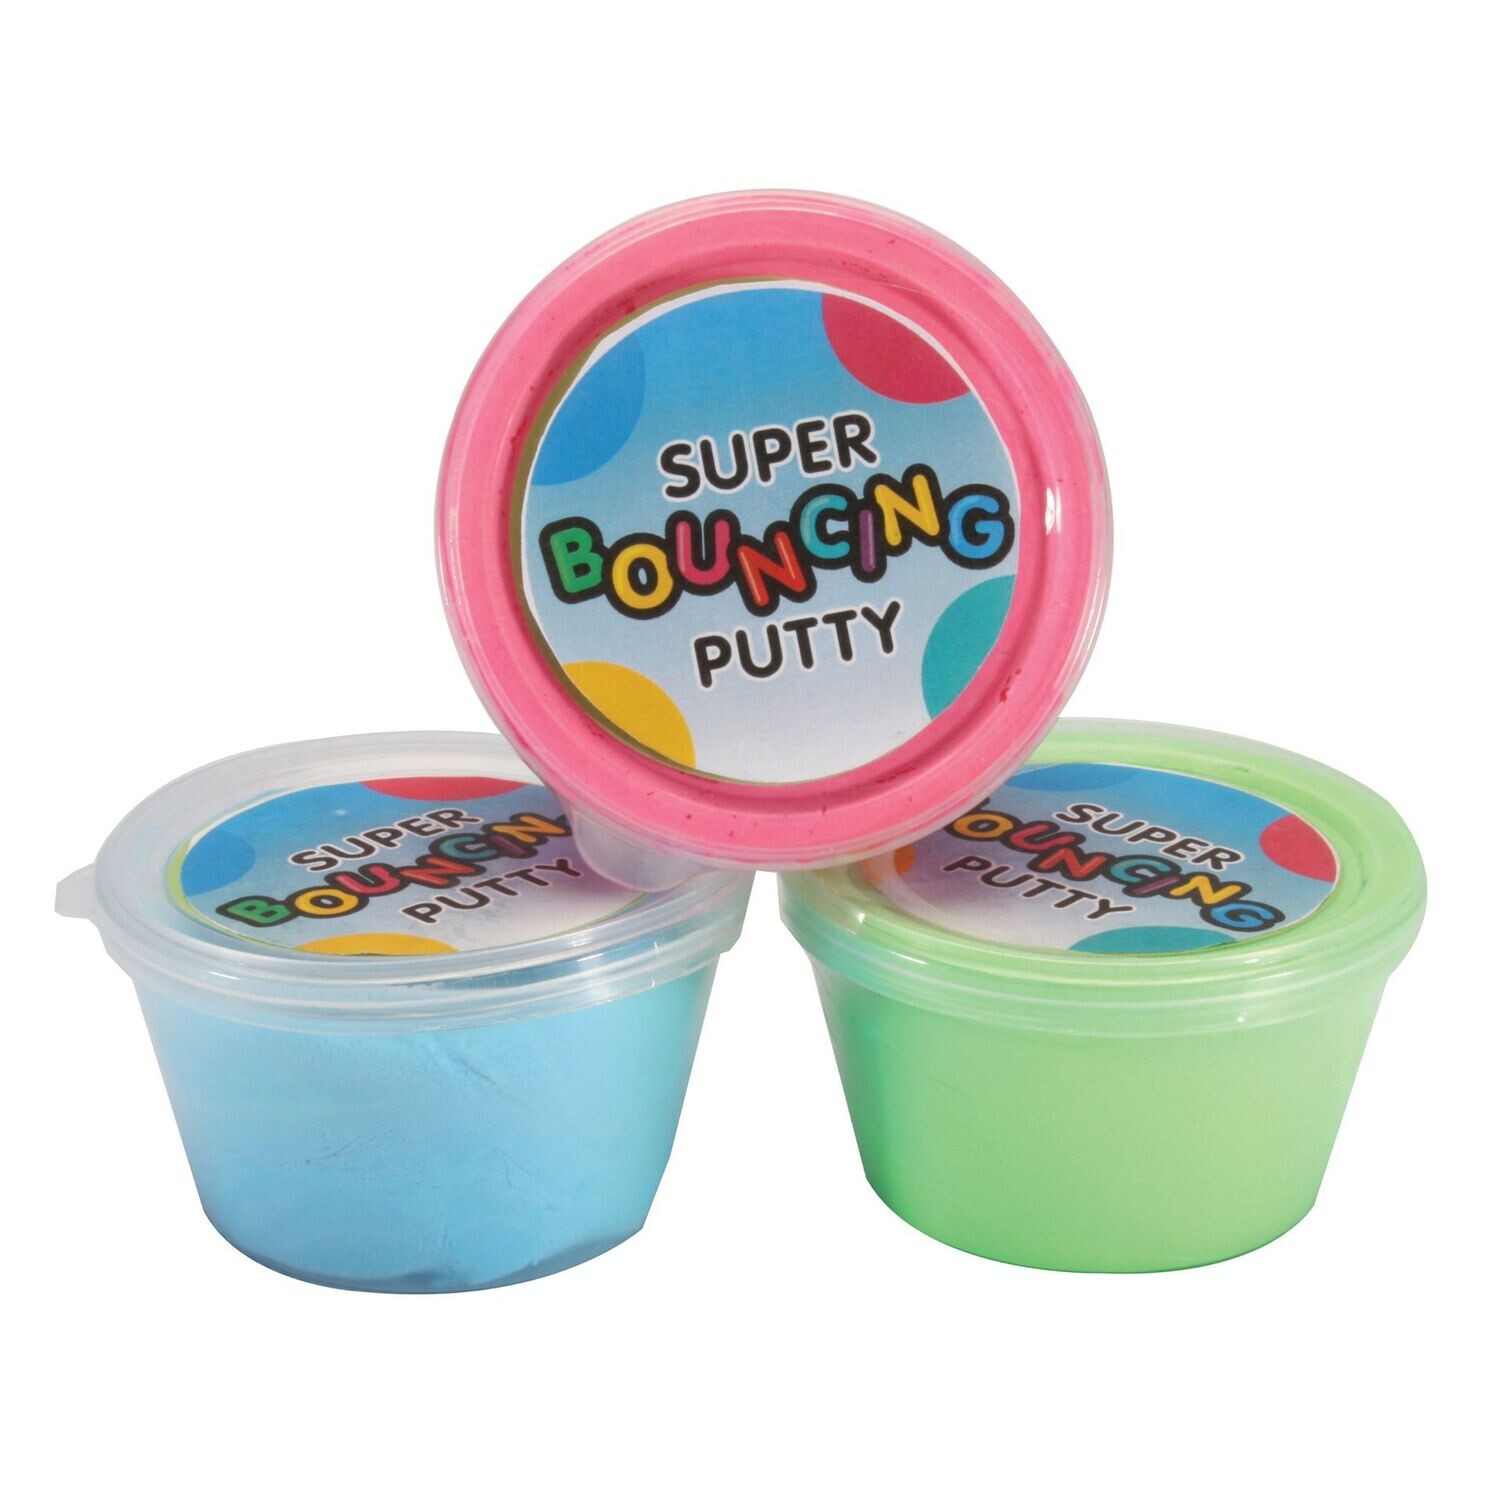 Bouncy putty